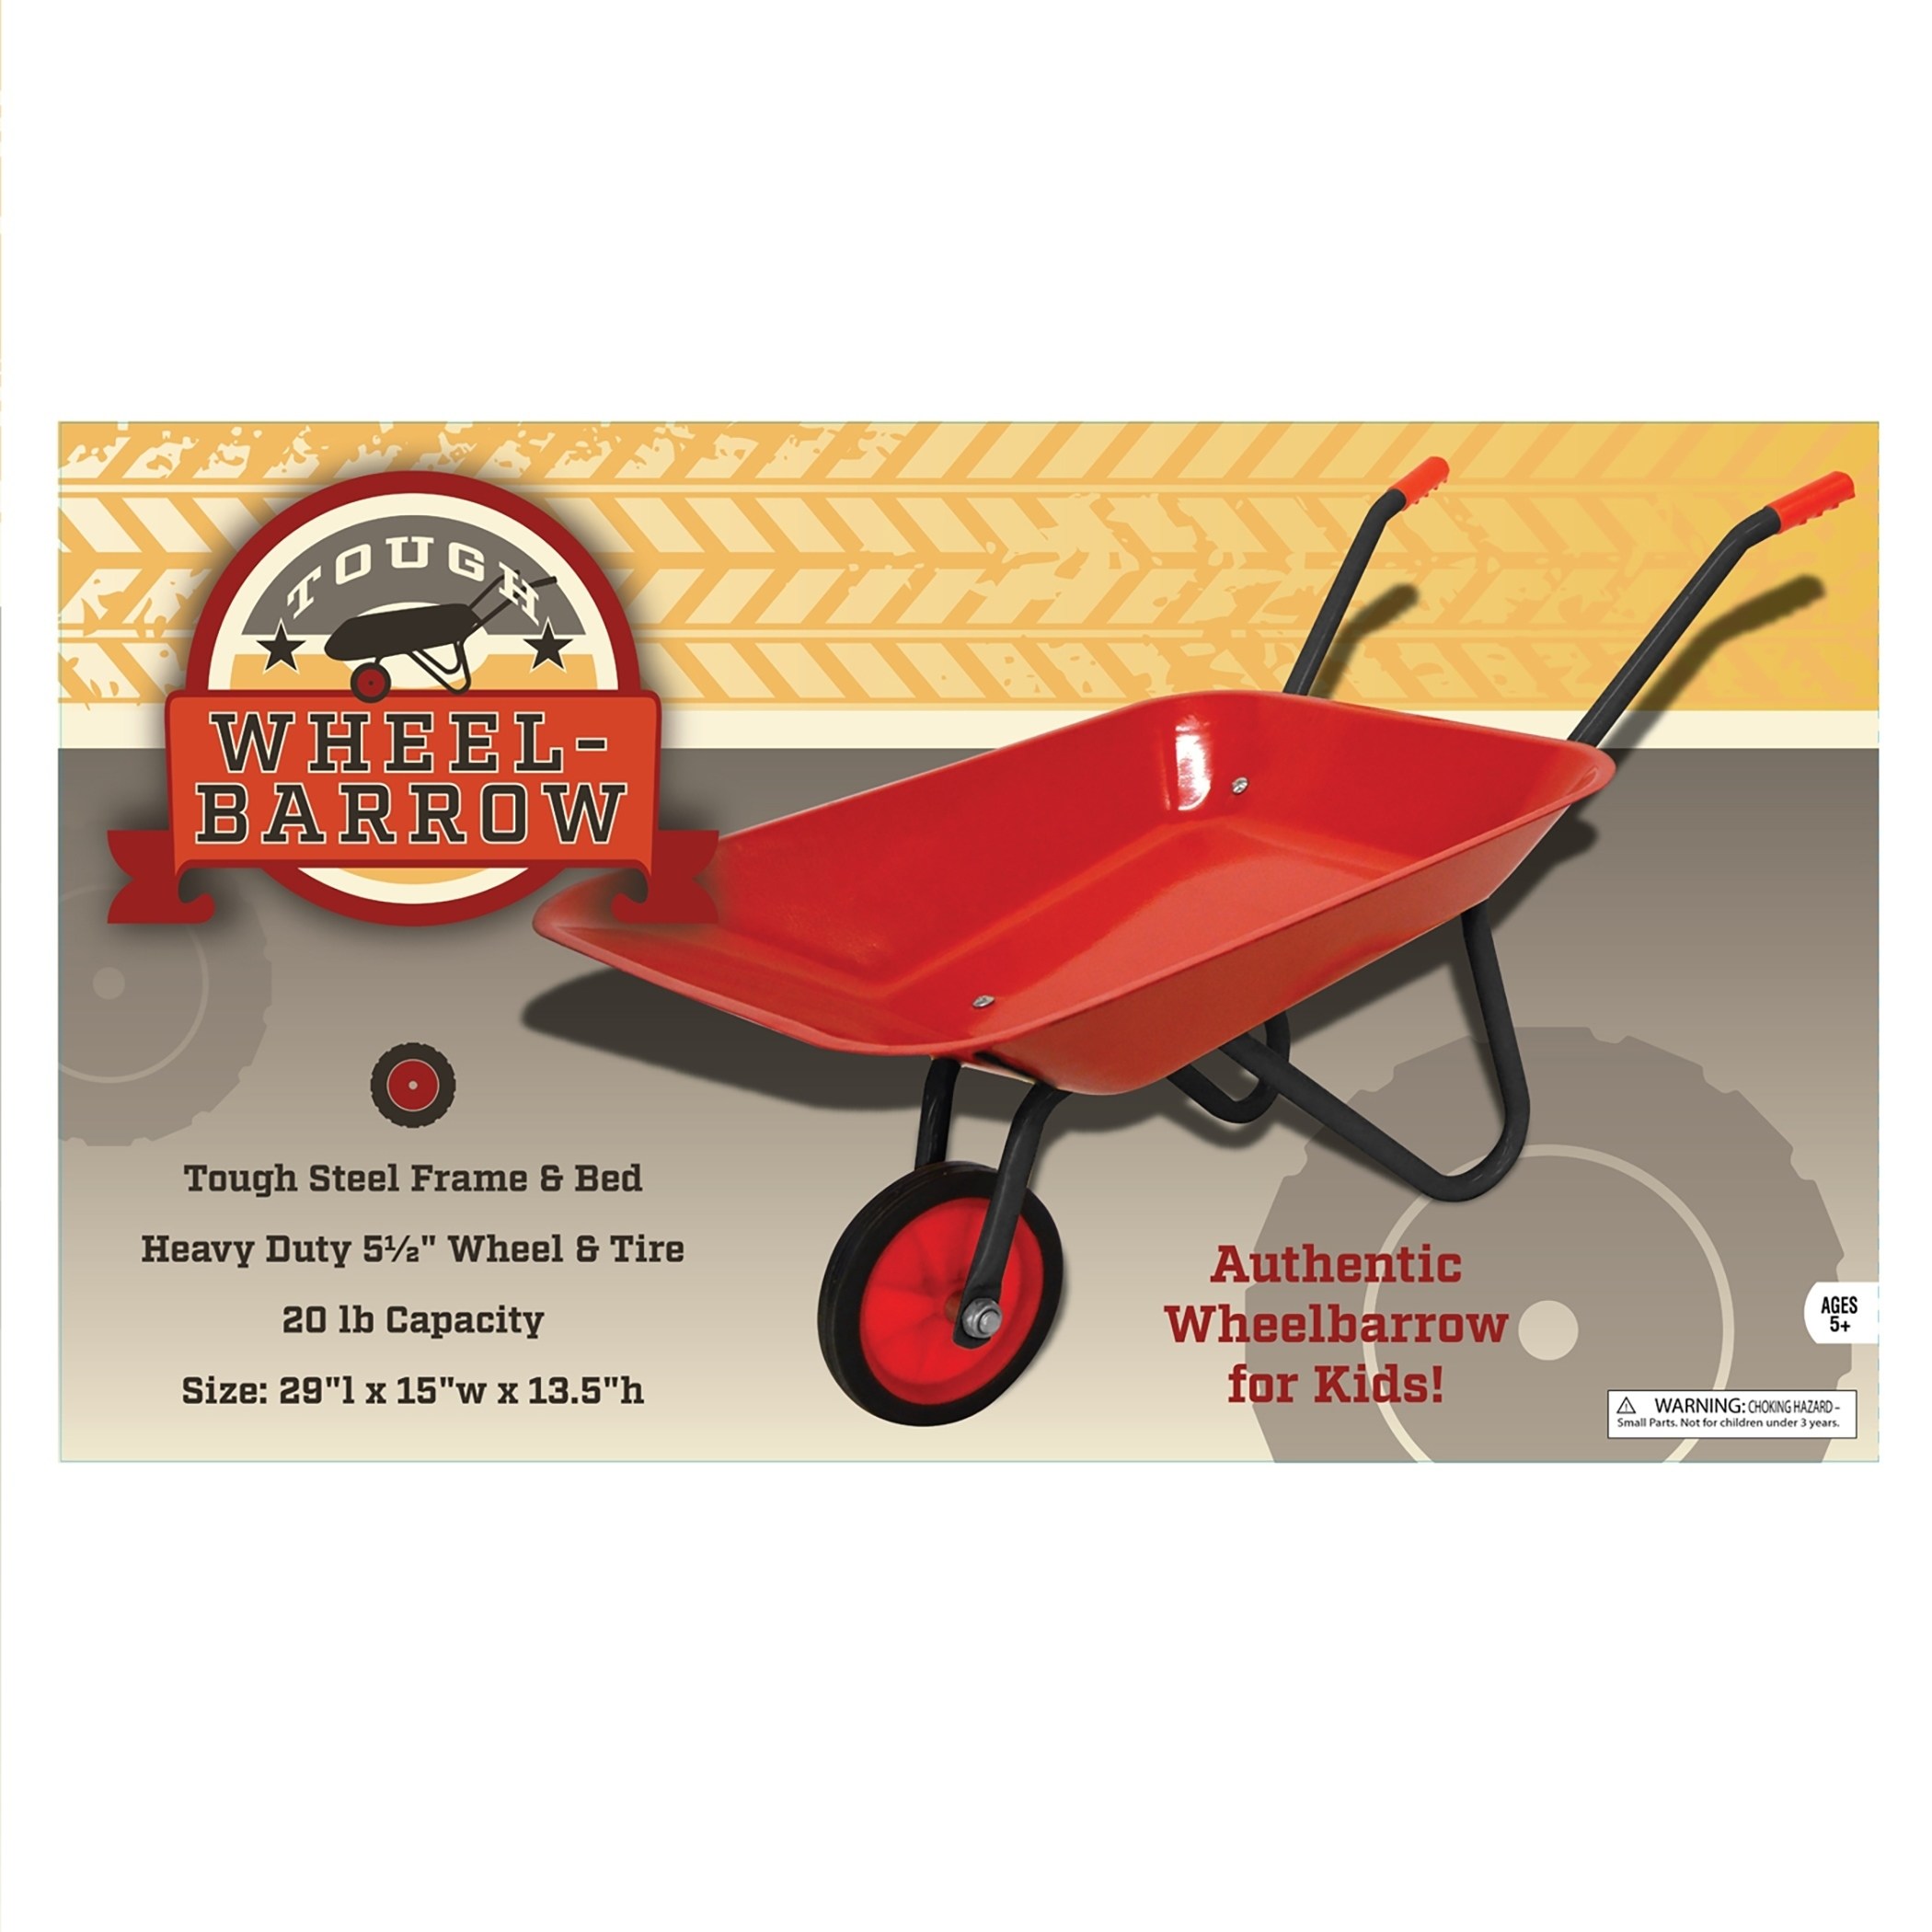 GENER8 Children's Red Metal Wheelbarrow - For ages 6 Years and up. - image 2 of 2